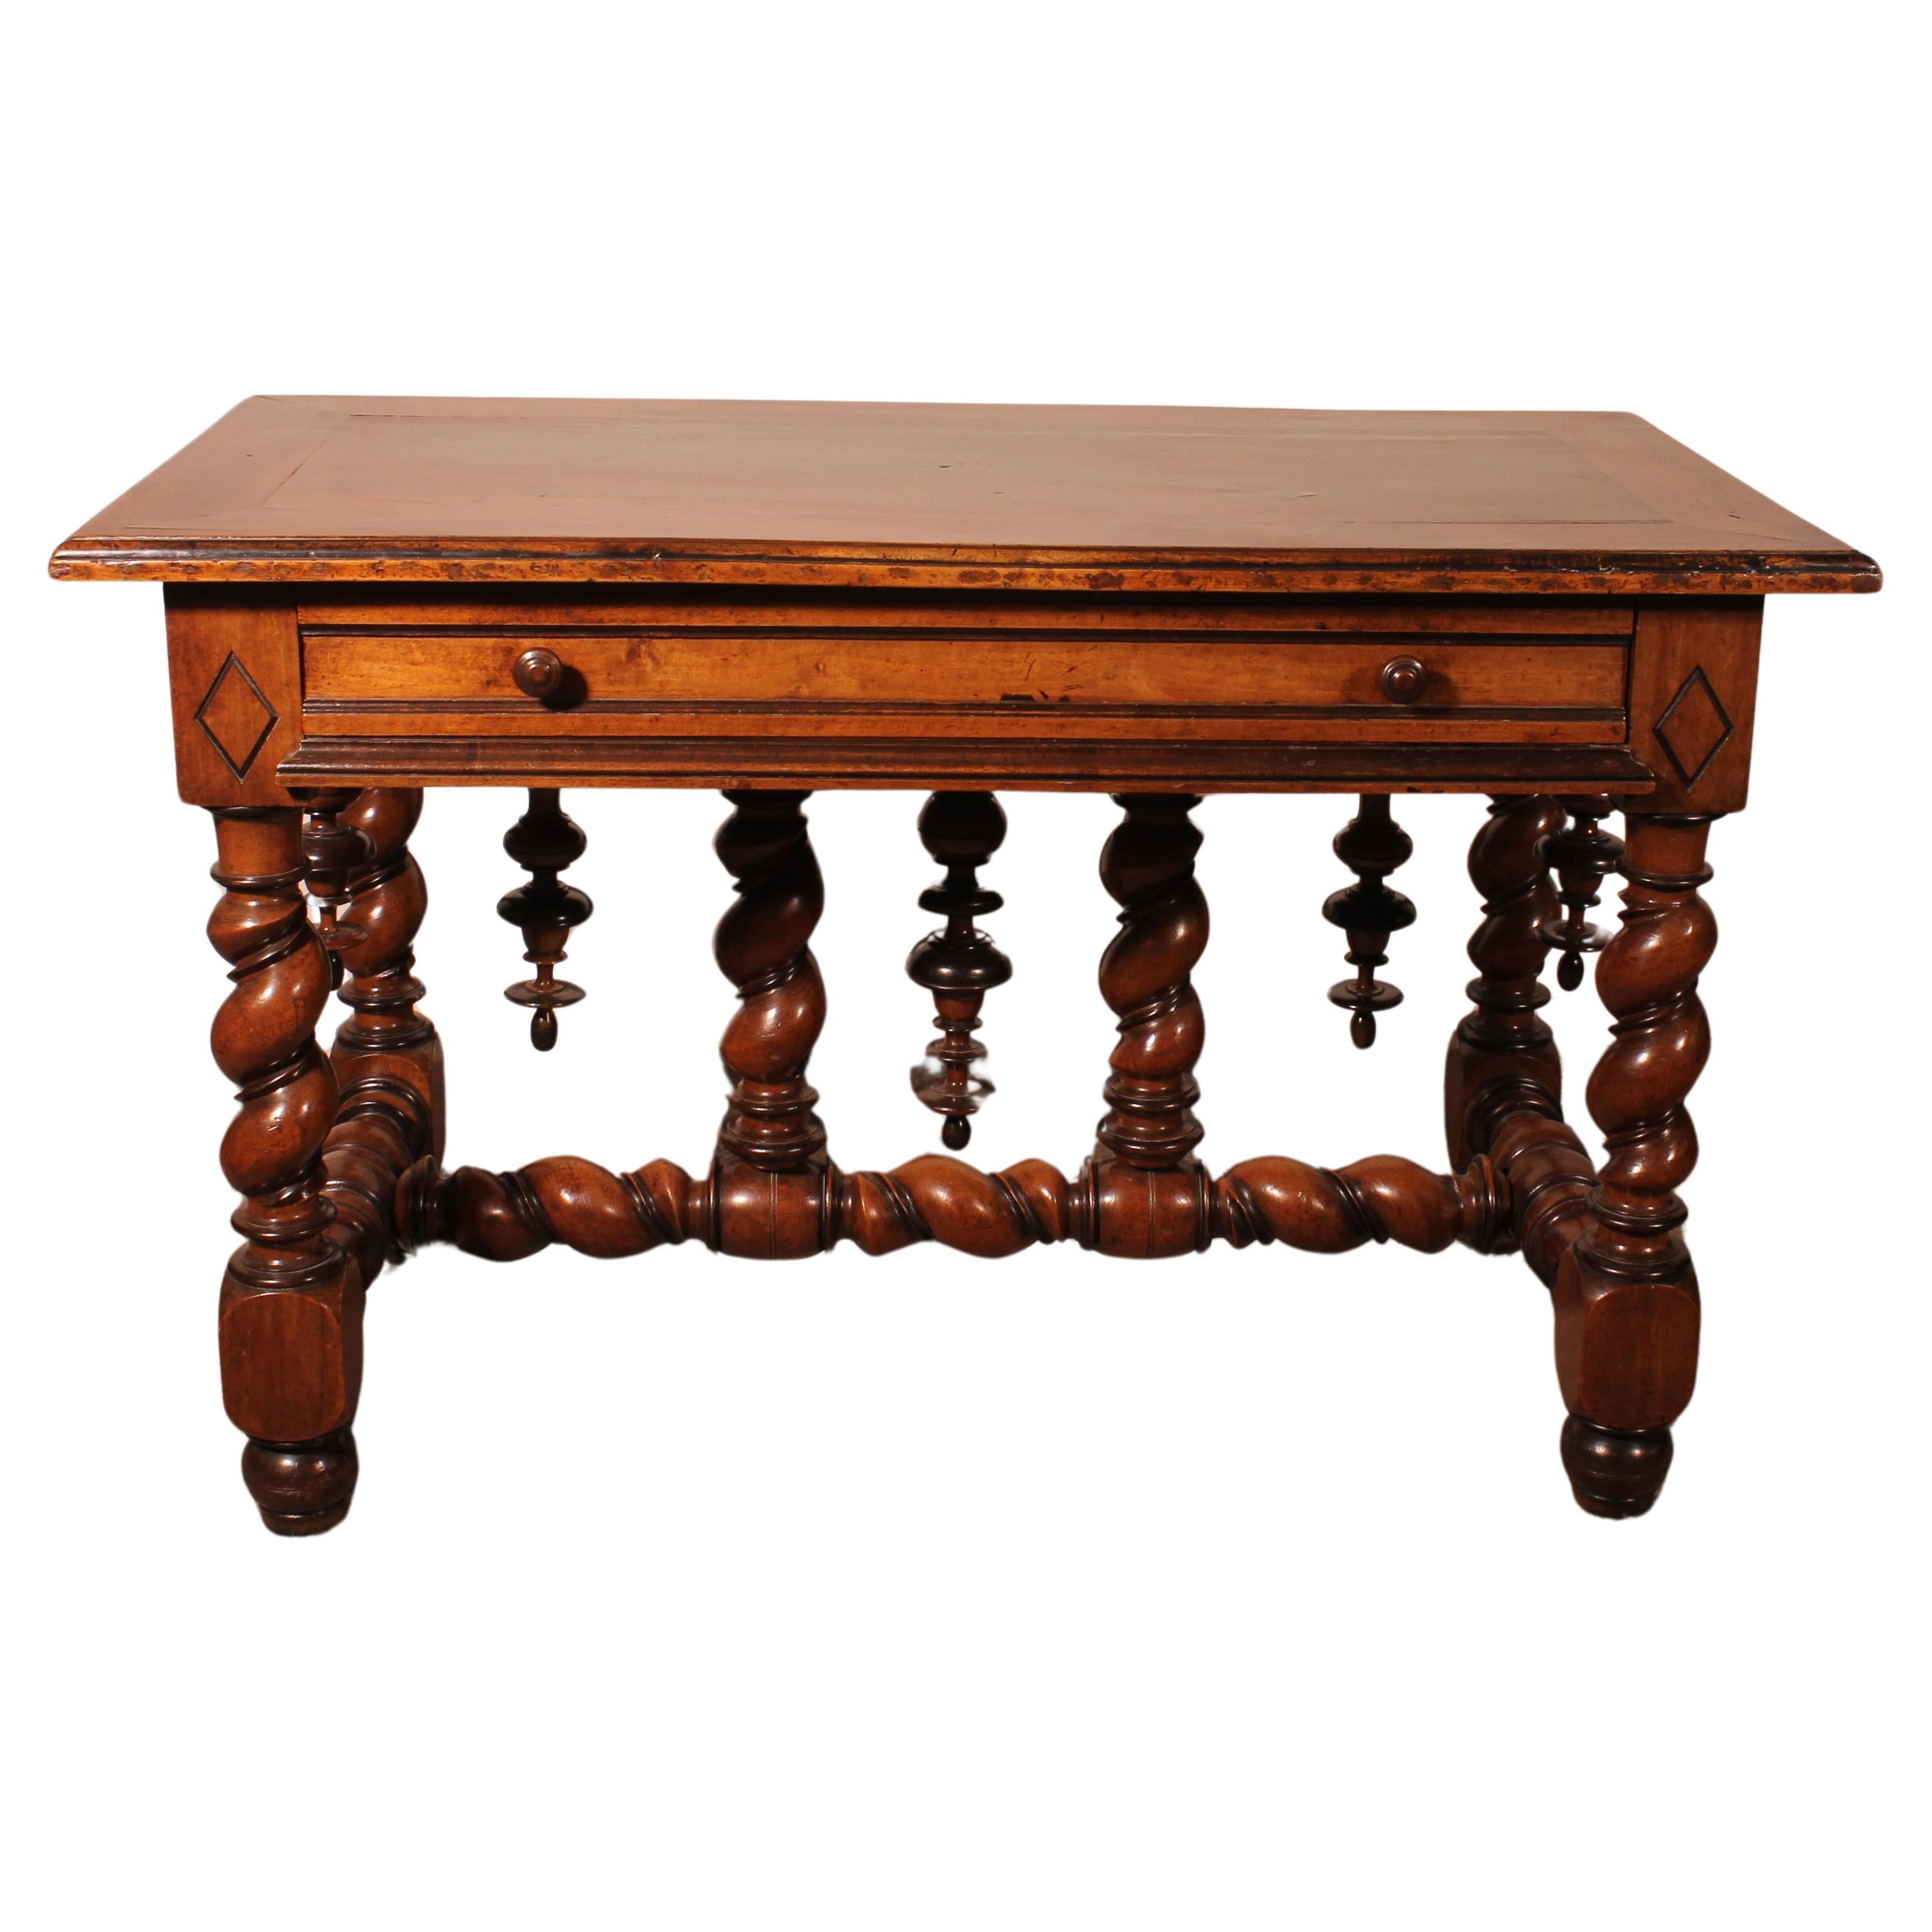 Louis XIII Period Center Table Or Console In Walnut -early 17 Century For Sale